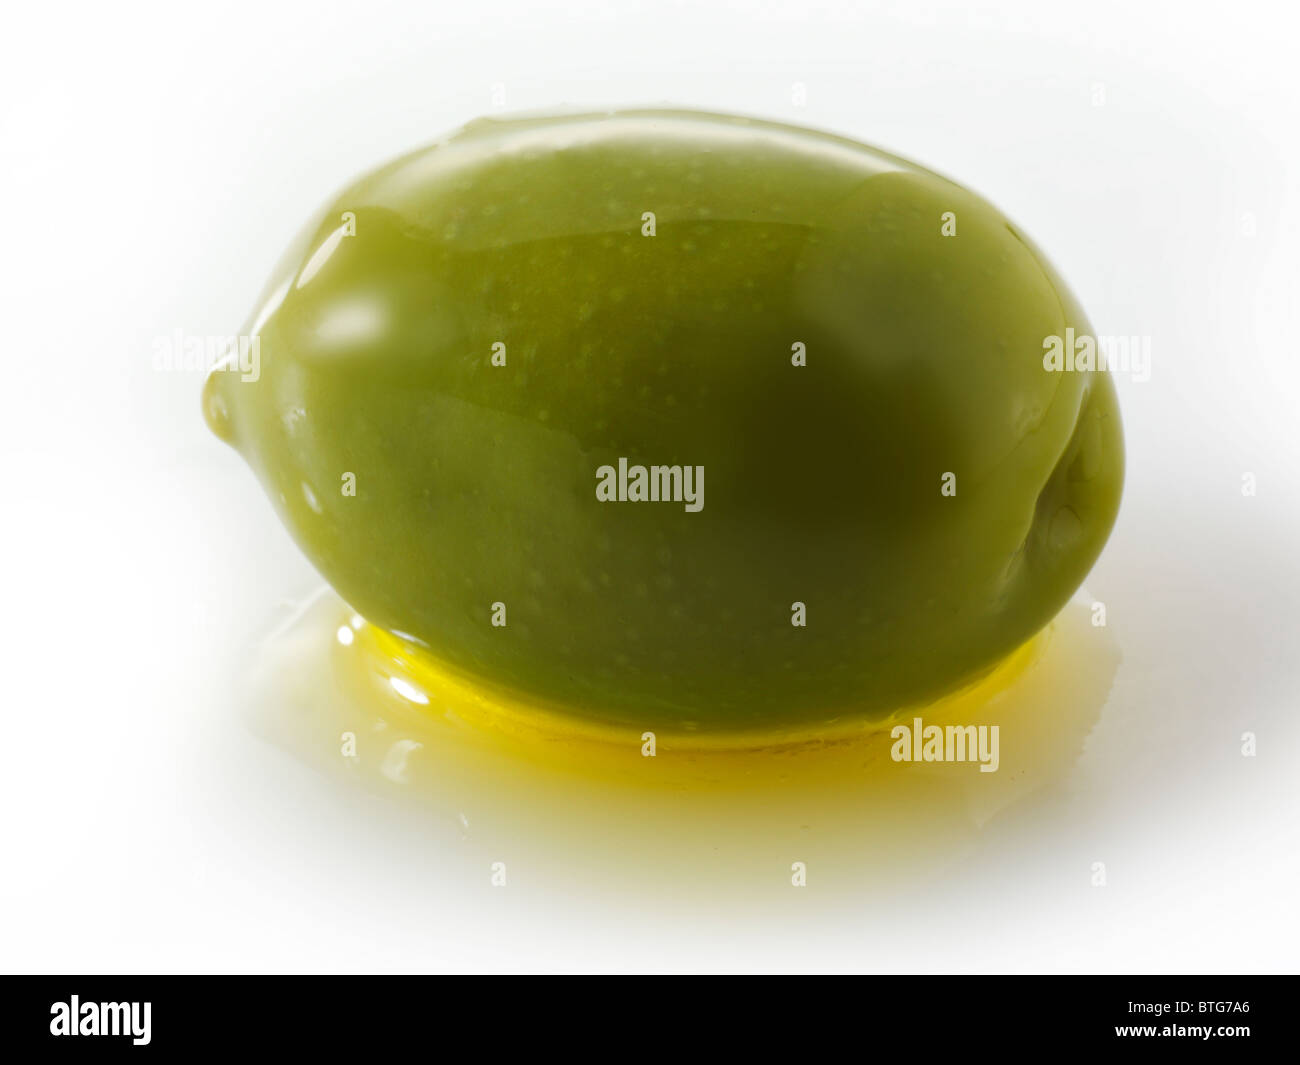 Whole green Queen olives Stock Photo